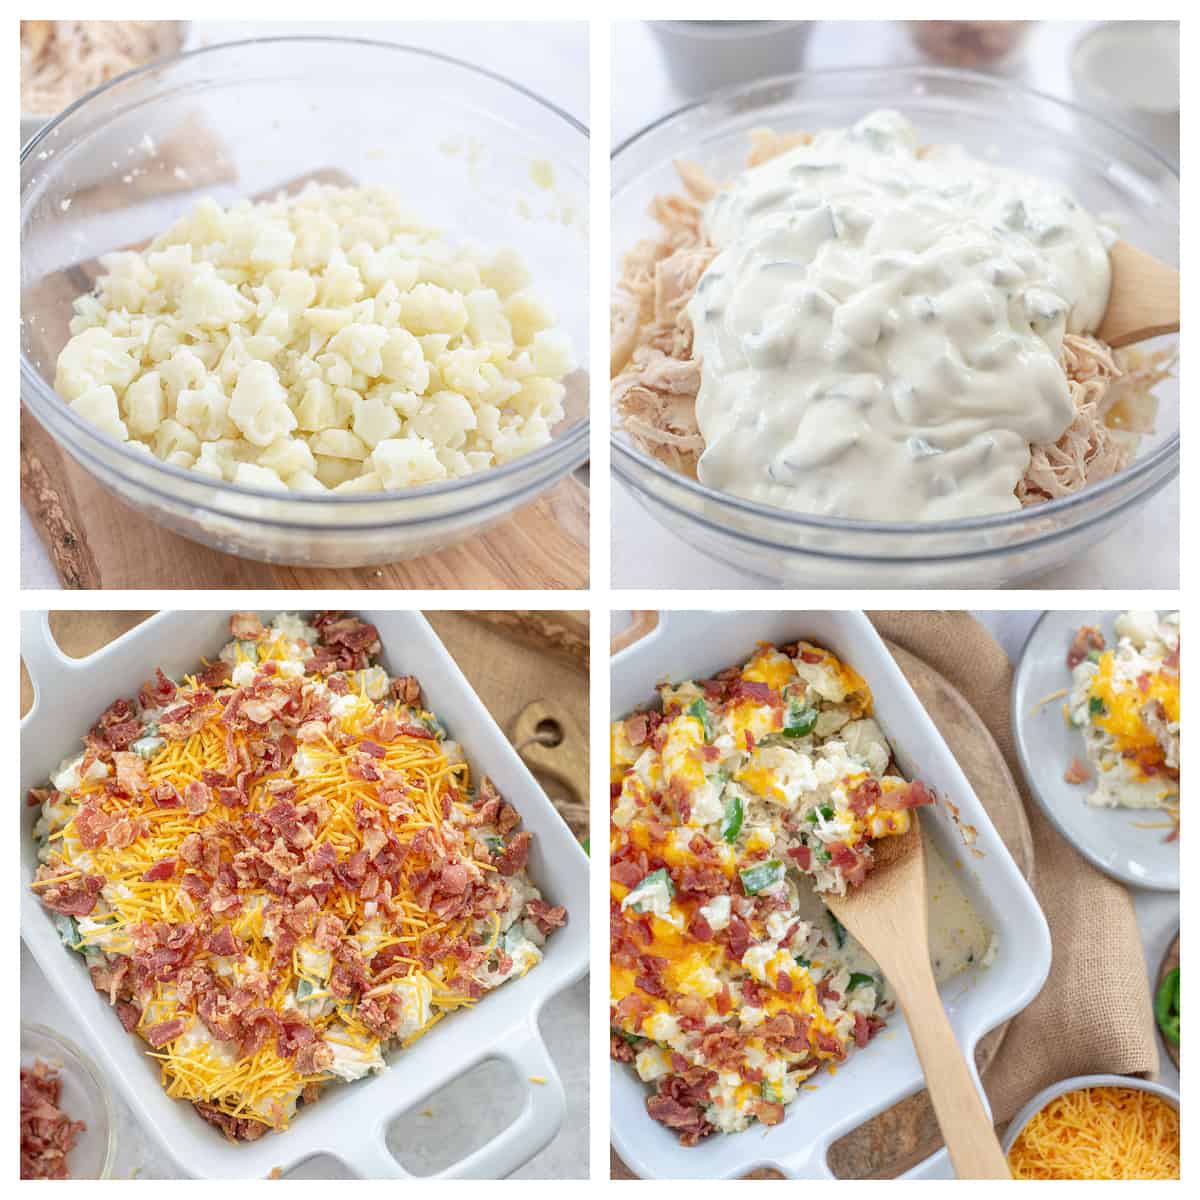 collage showing steps of making jalapeno popper casserole recipe.